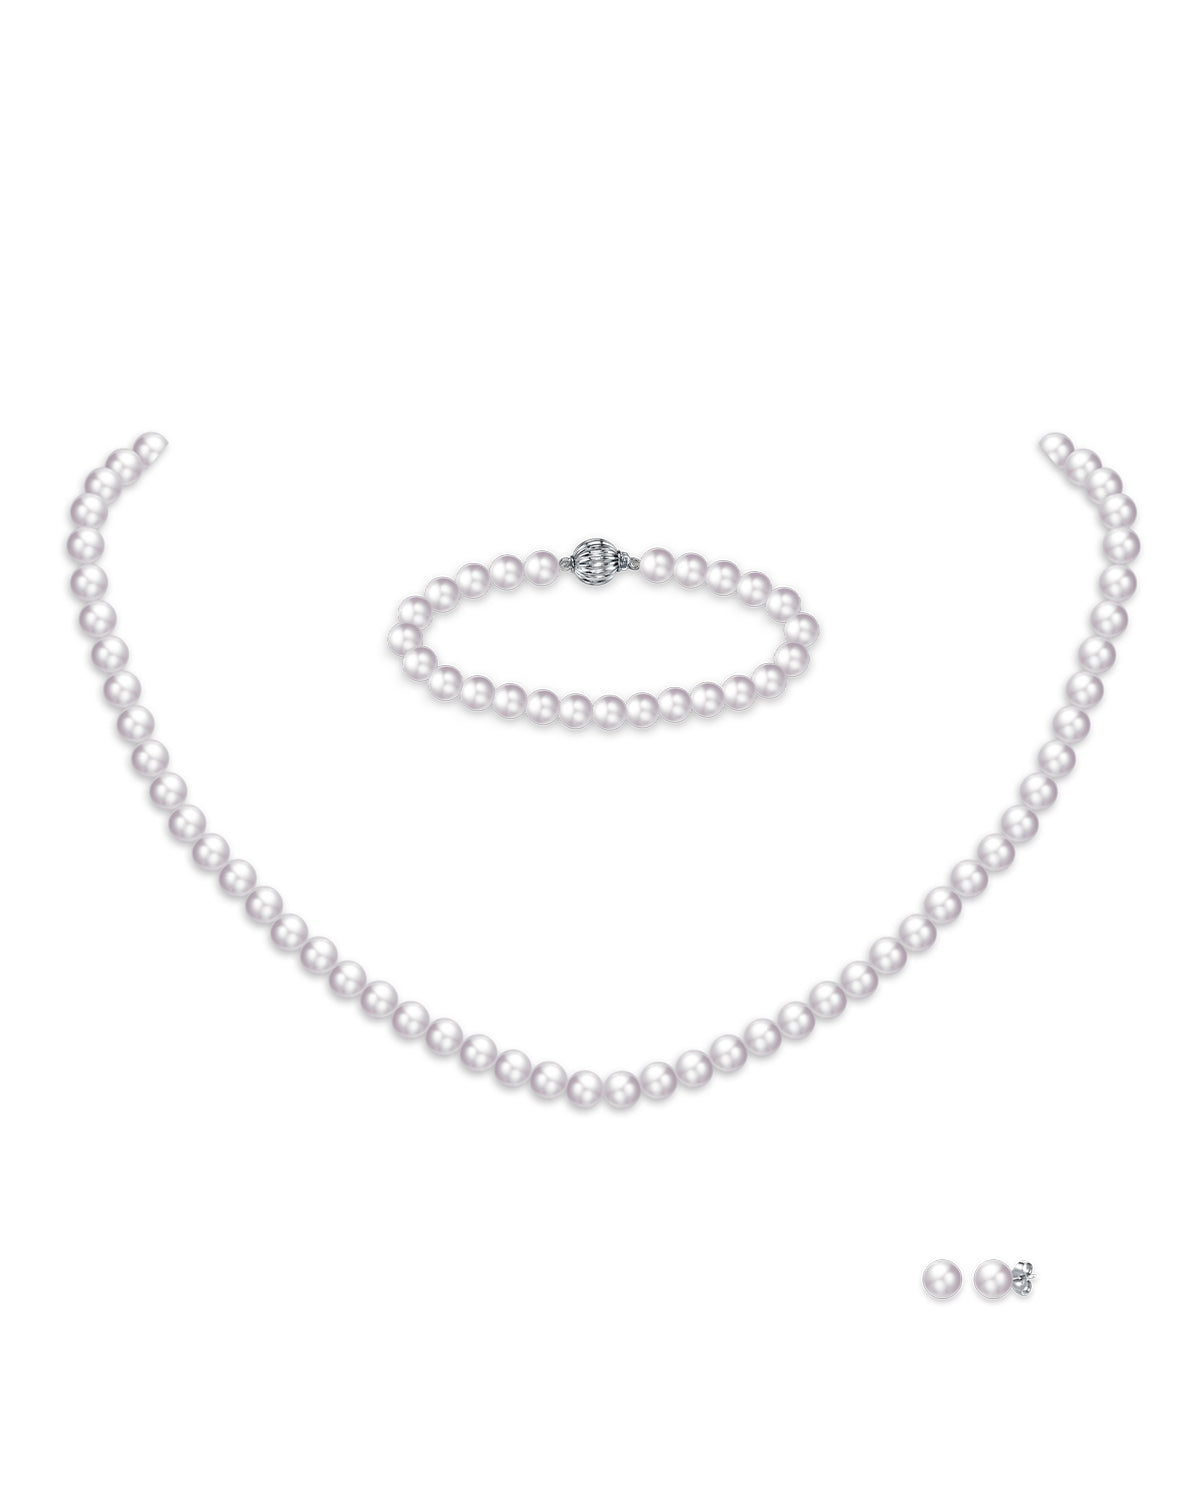 3.0-4.5mm Freshwater White Pearl Sets in AAA Quality